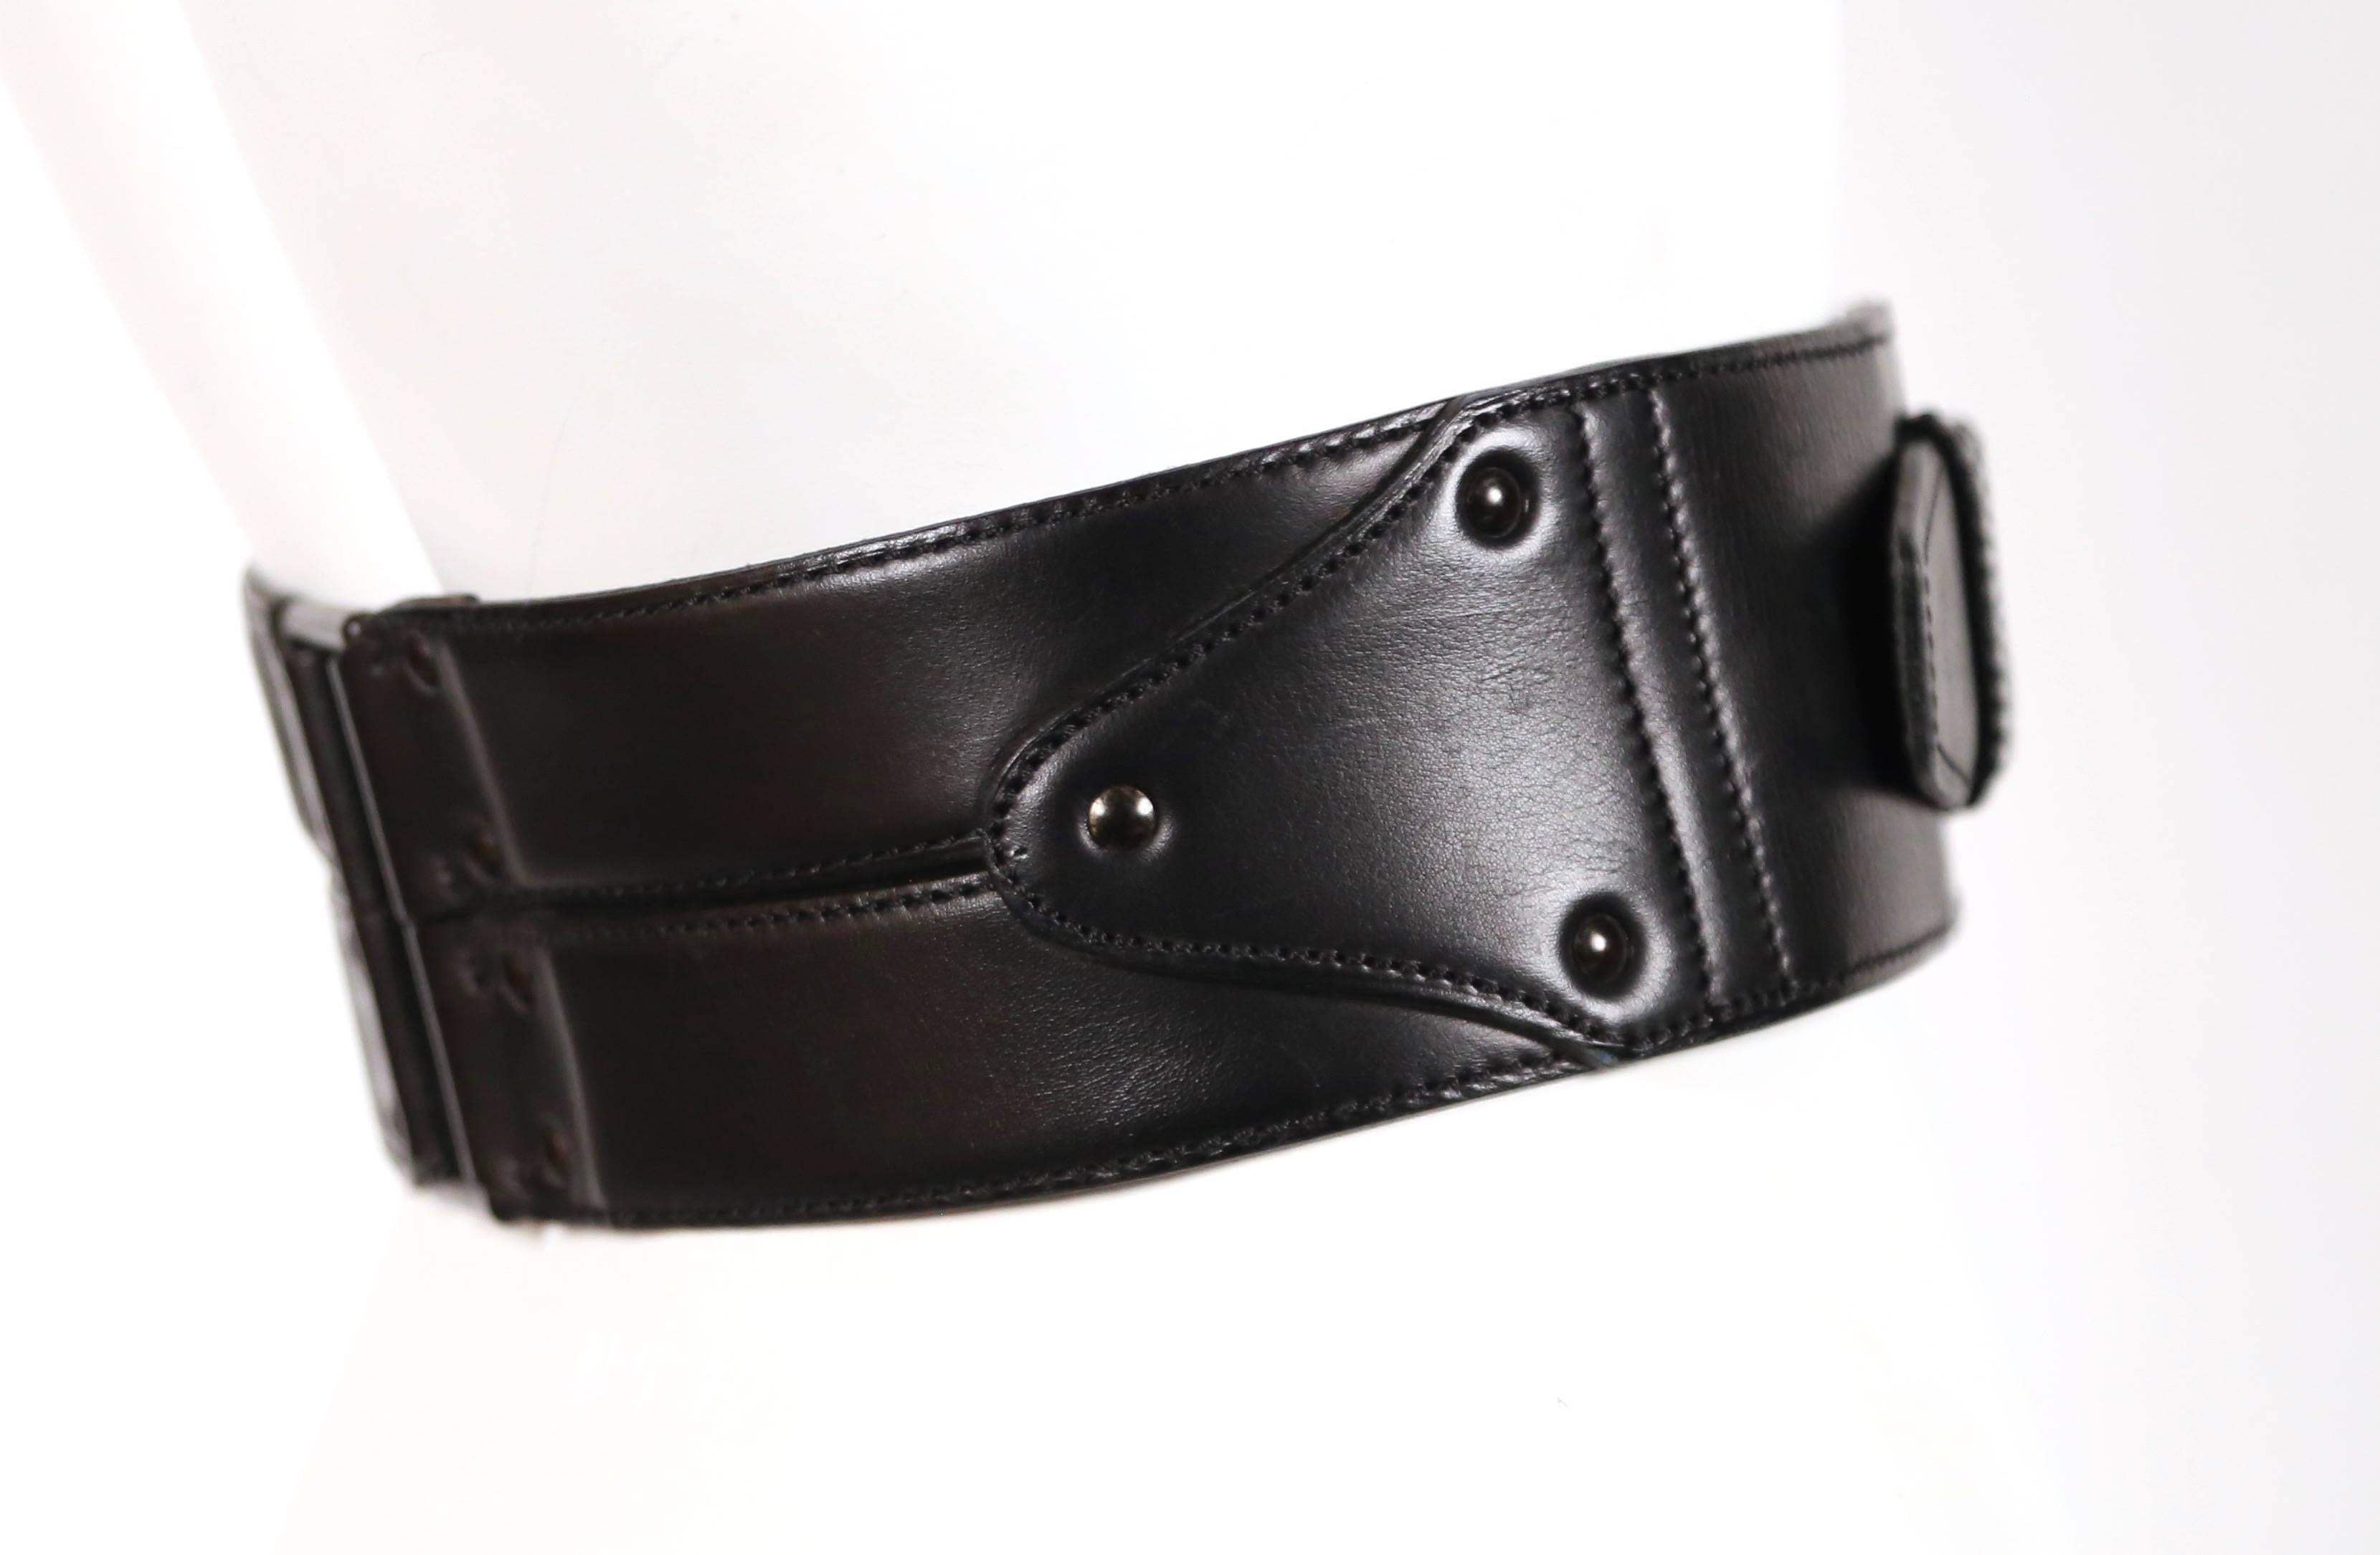 Jet black asymmetrical leather belt designed by Azzedine Alaia dating to the late 1980's, early 1990's. French size 65. Belt holes fall at 23.25